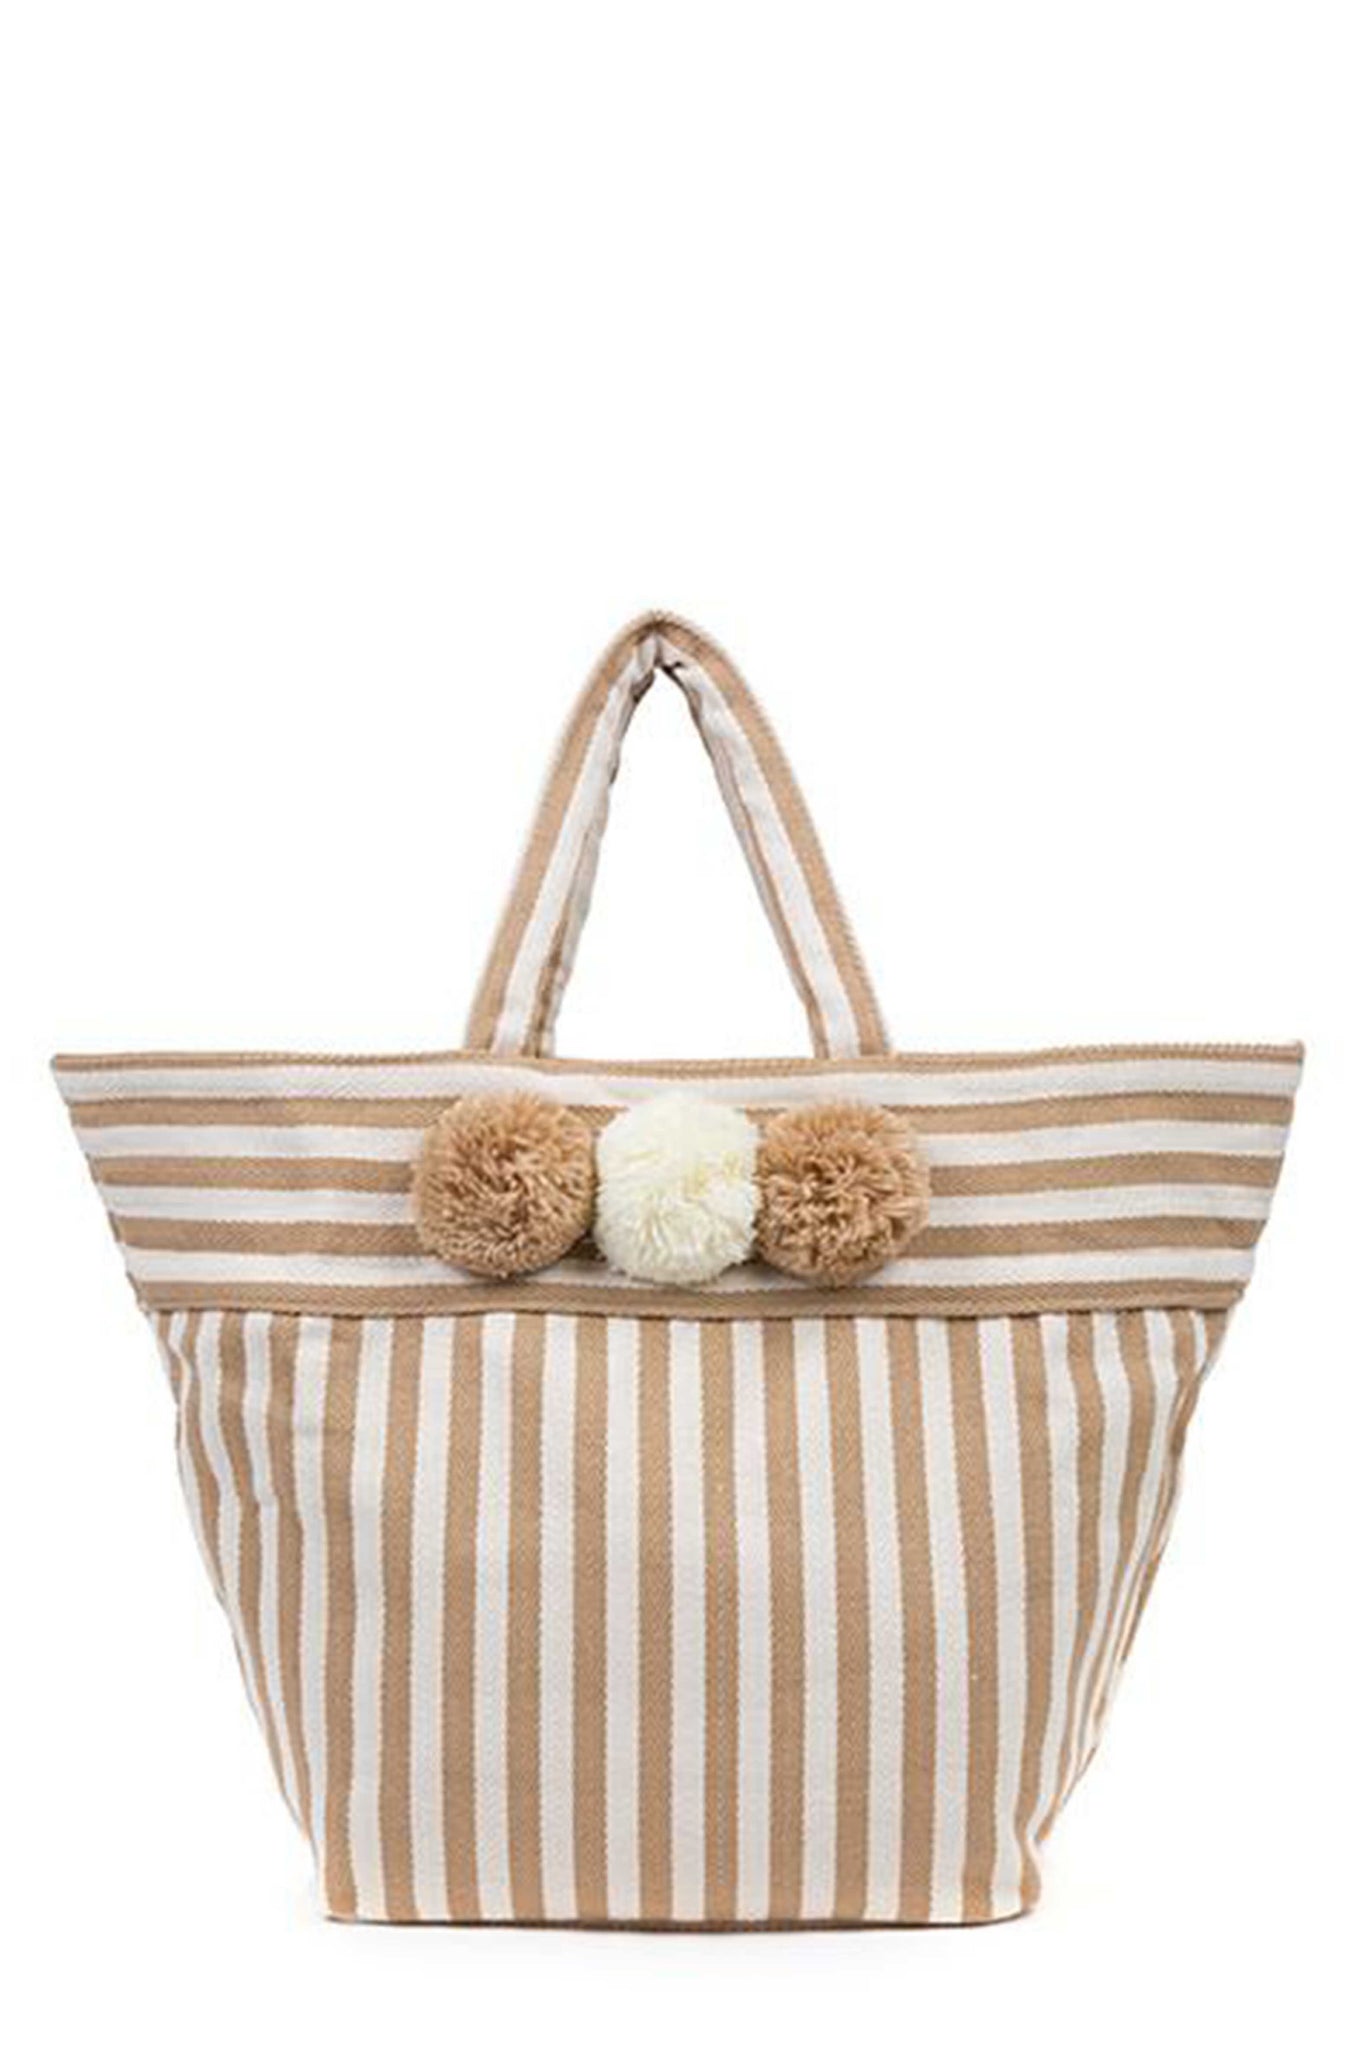 Valerie 3-Pom Tote by JadeTribe. A smaller version of the best selling beach bag. Nautical textile with three pom pom detail. Makes the perfect summer beach tote with interior pocket. This does not have cross body straps. This bag is vegan. Measurements L23 x H14 x W5 inches 